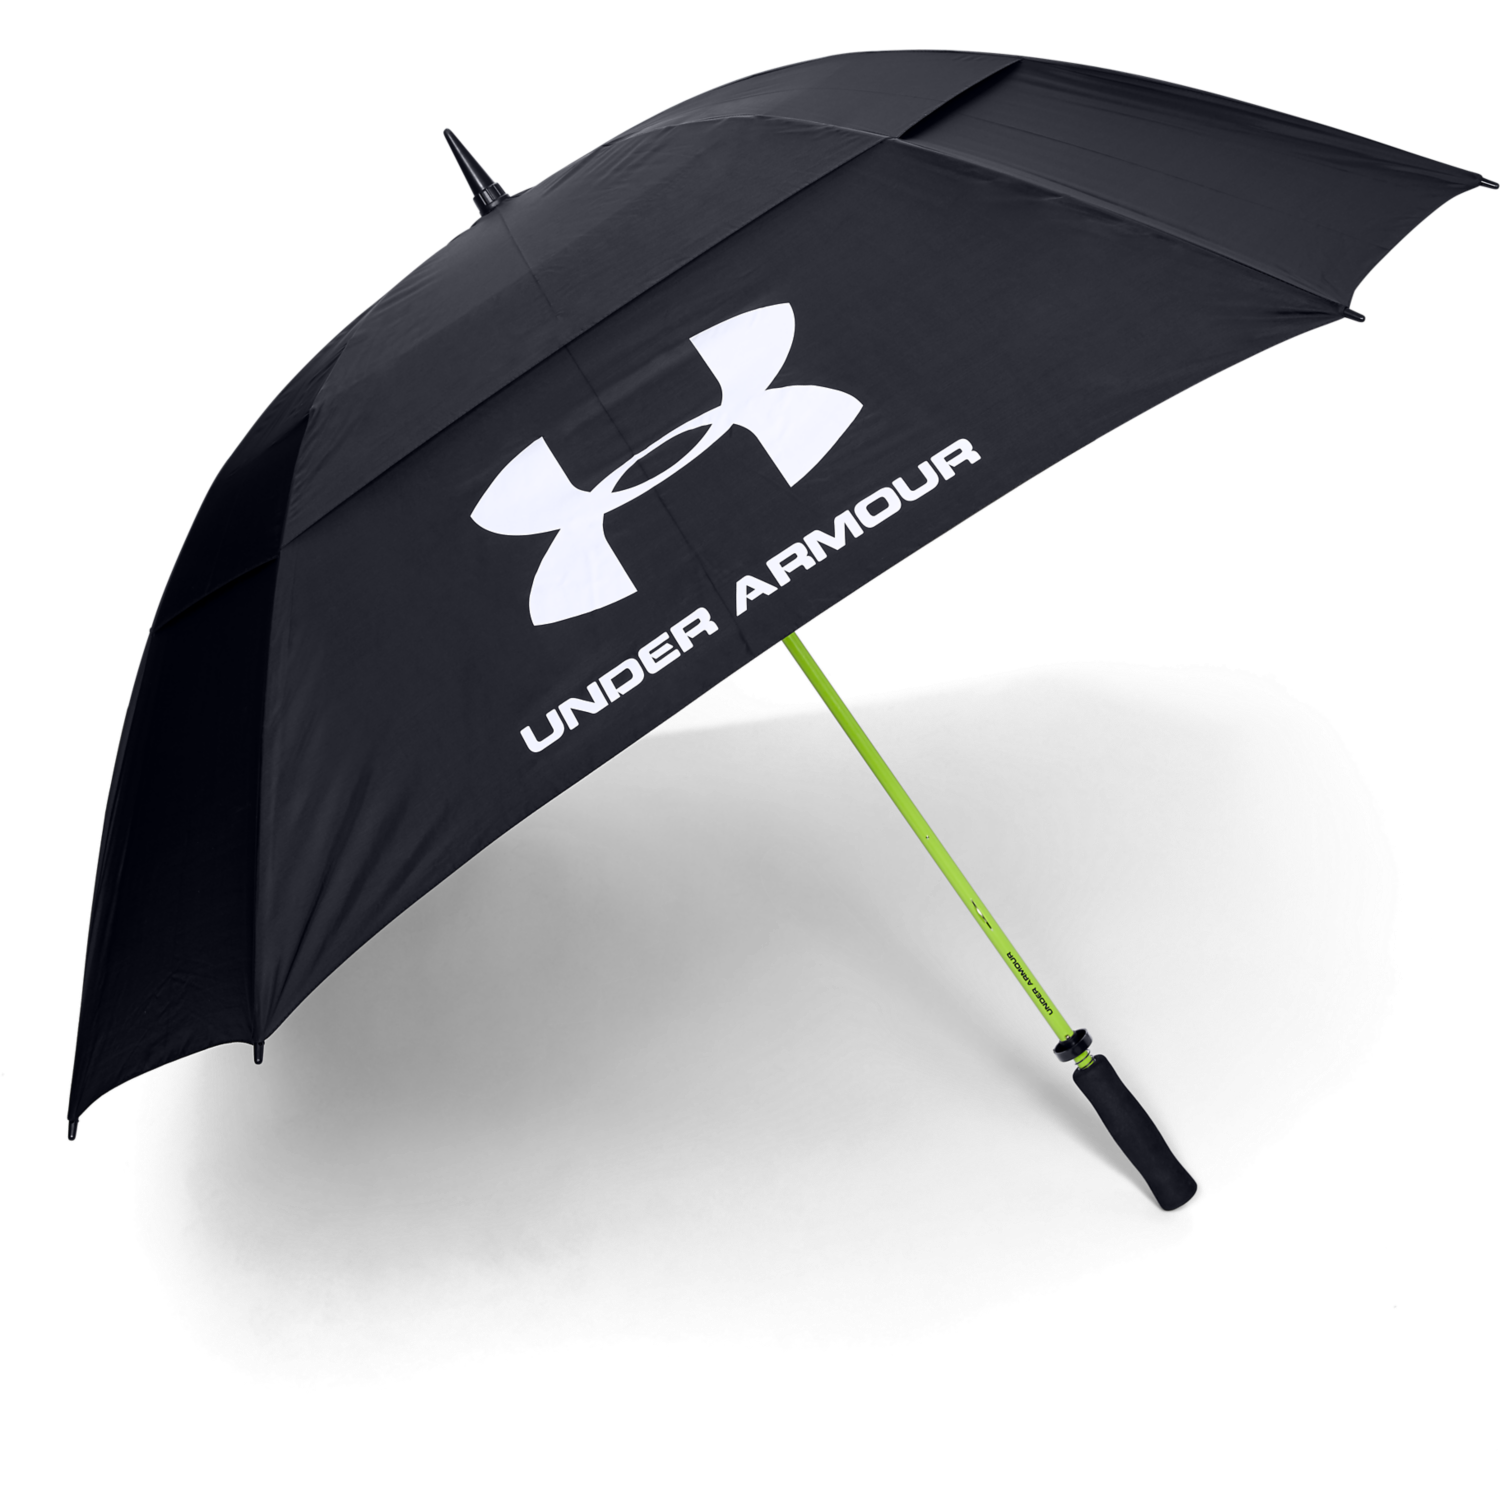 Under Armour Golfparaply